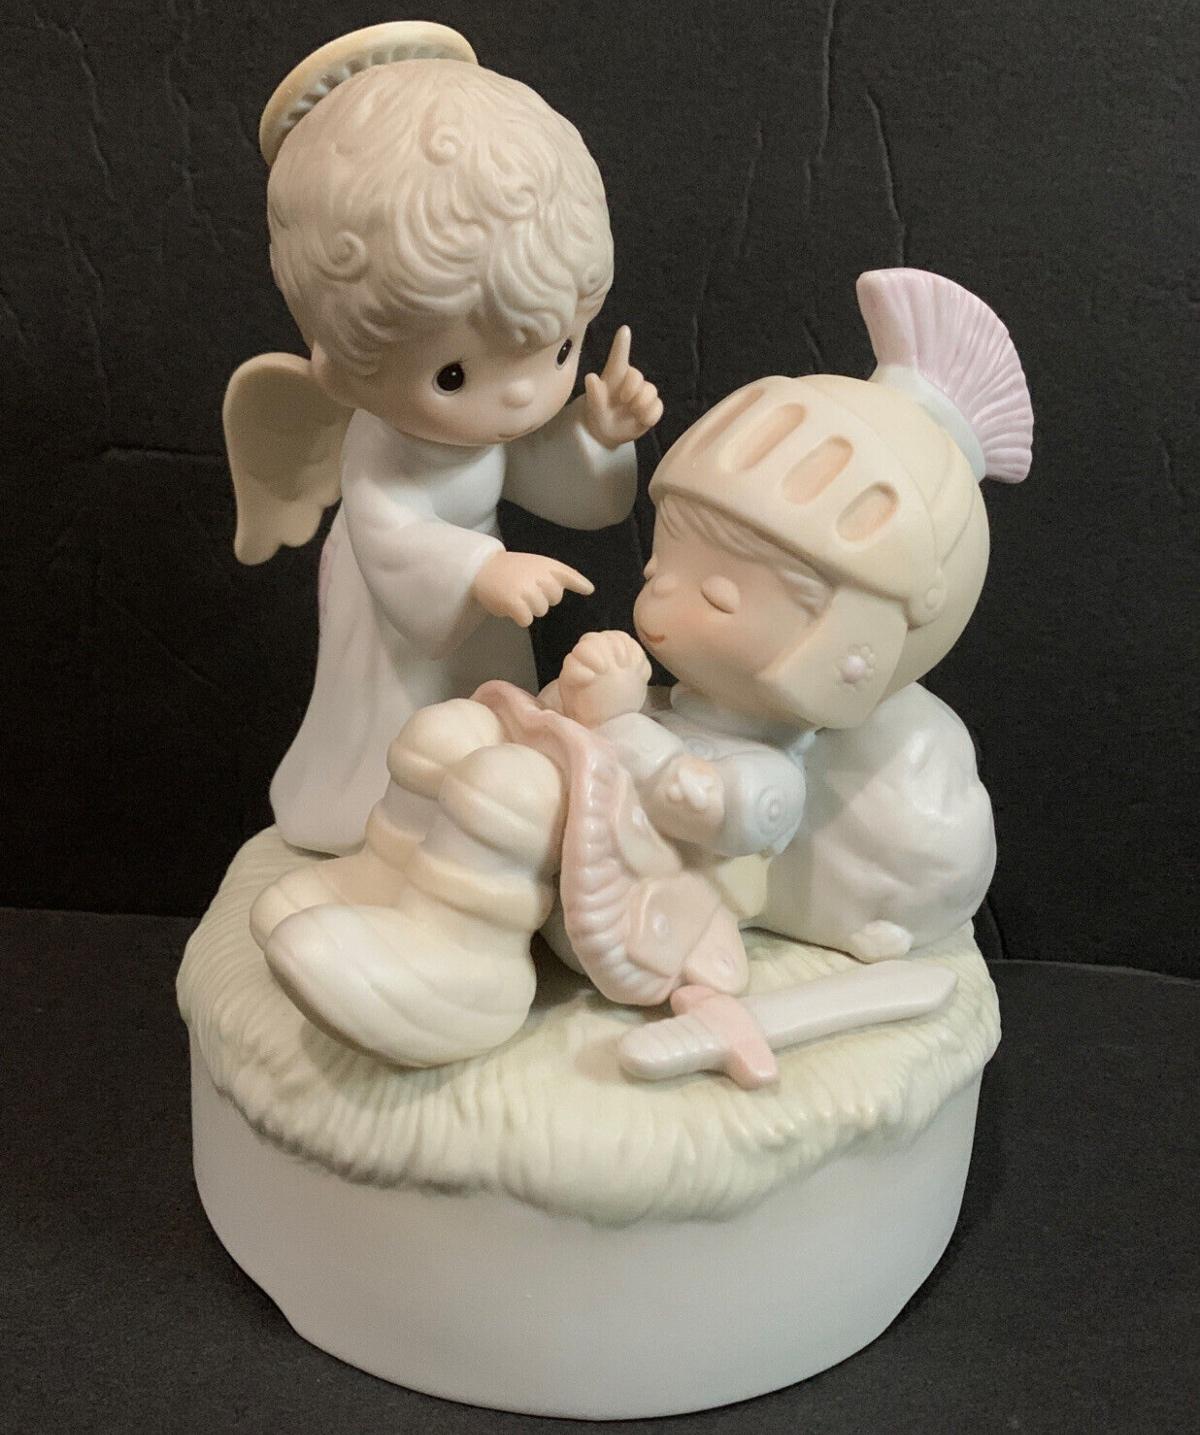 Are Precious Moments figurines worth anything?